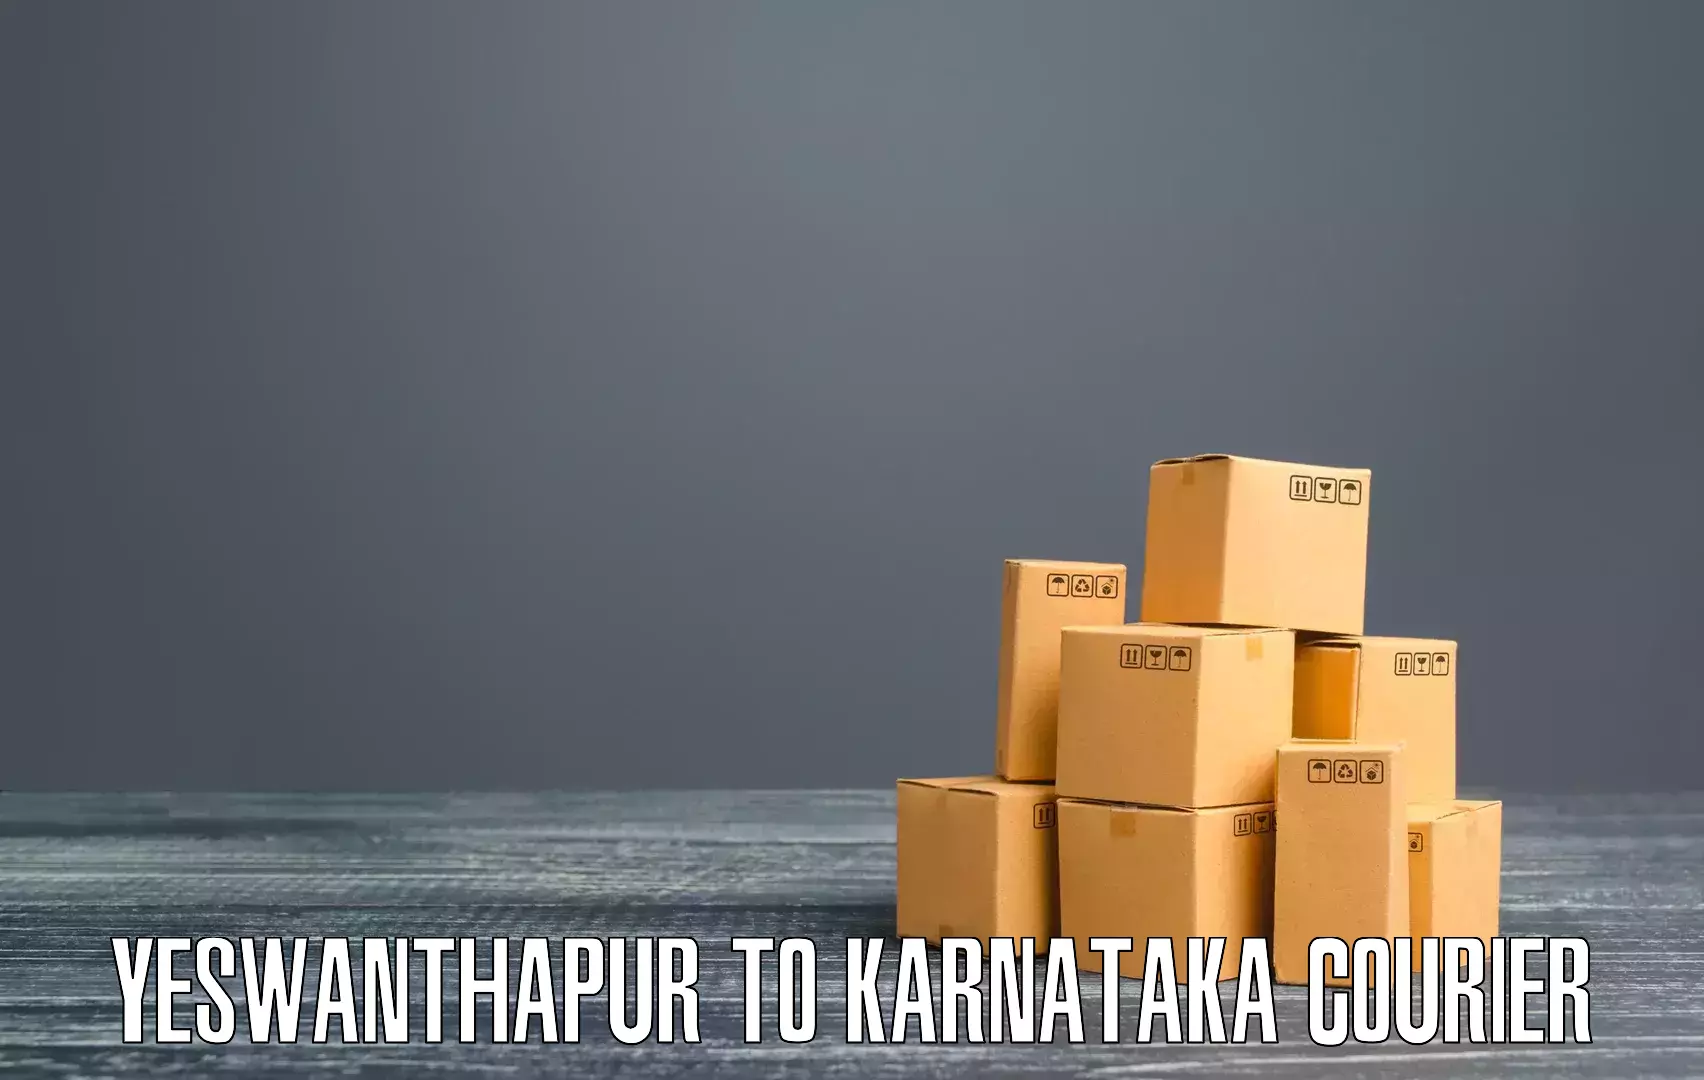 High-priority parcel service in Yeswanthapur to Manipal